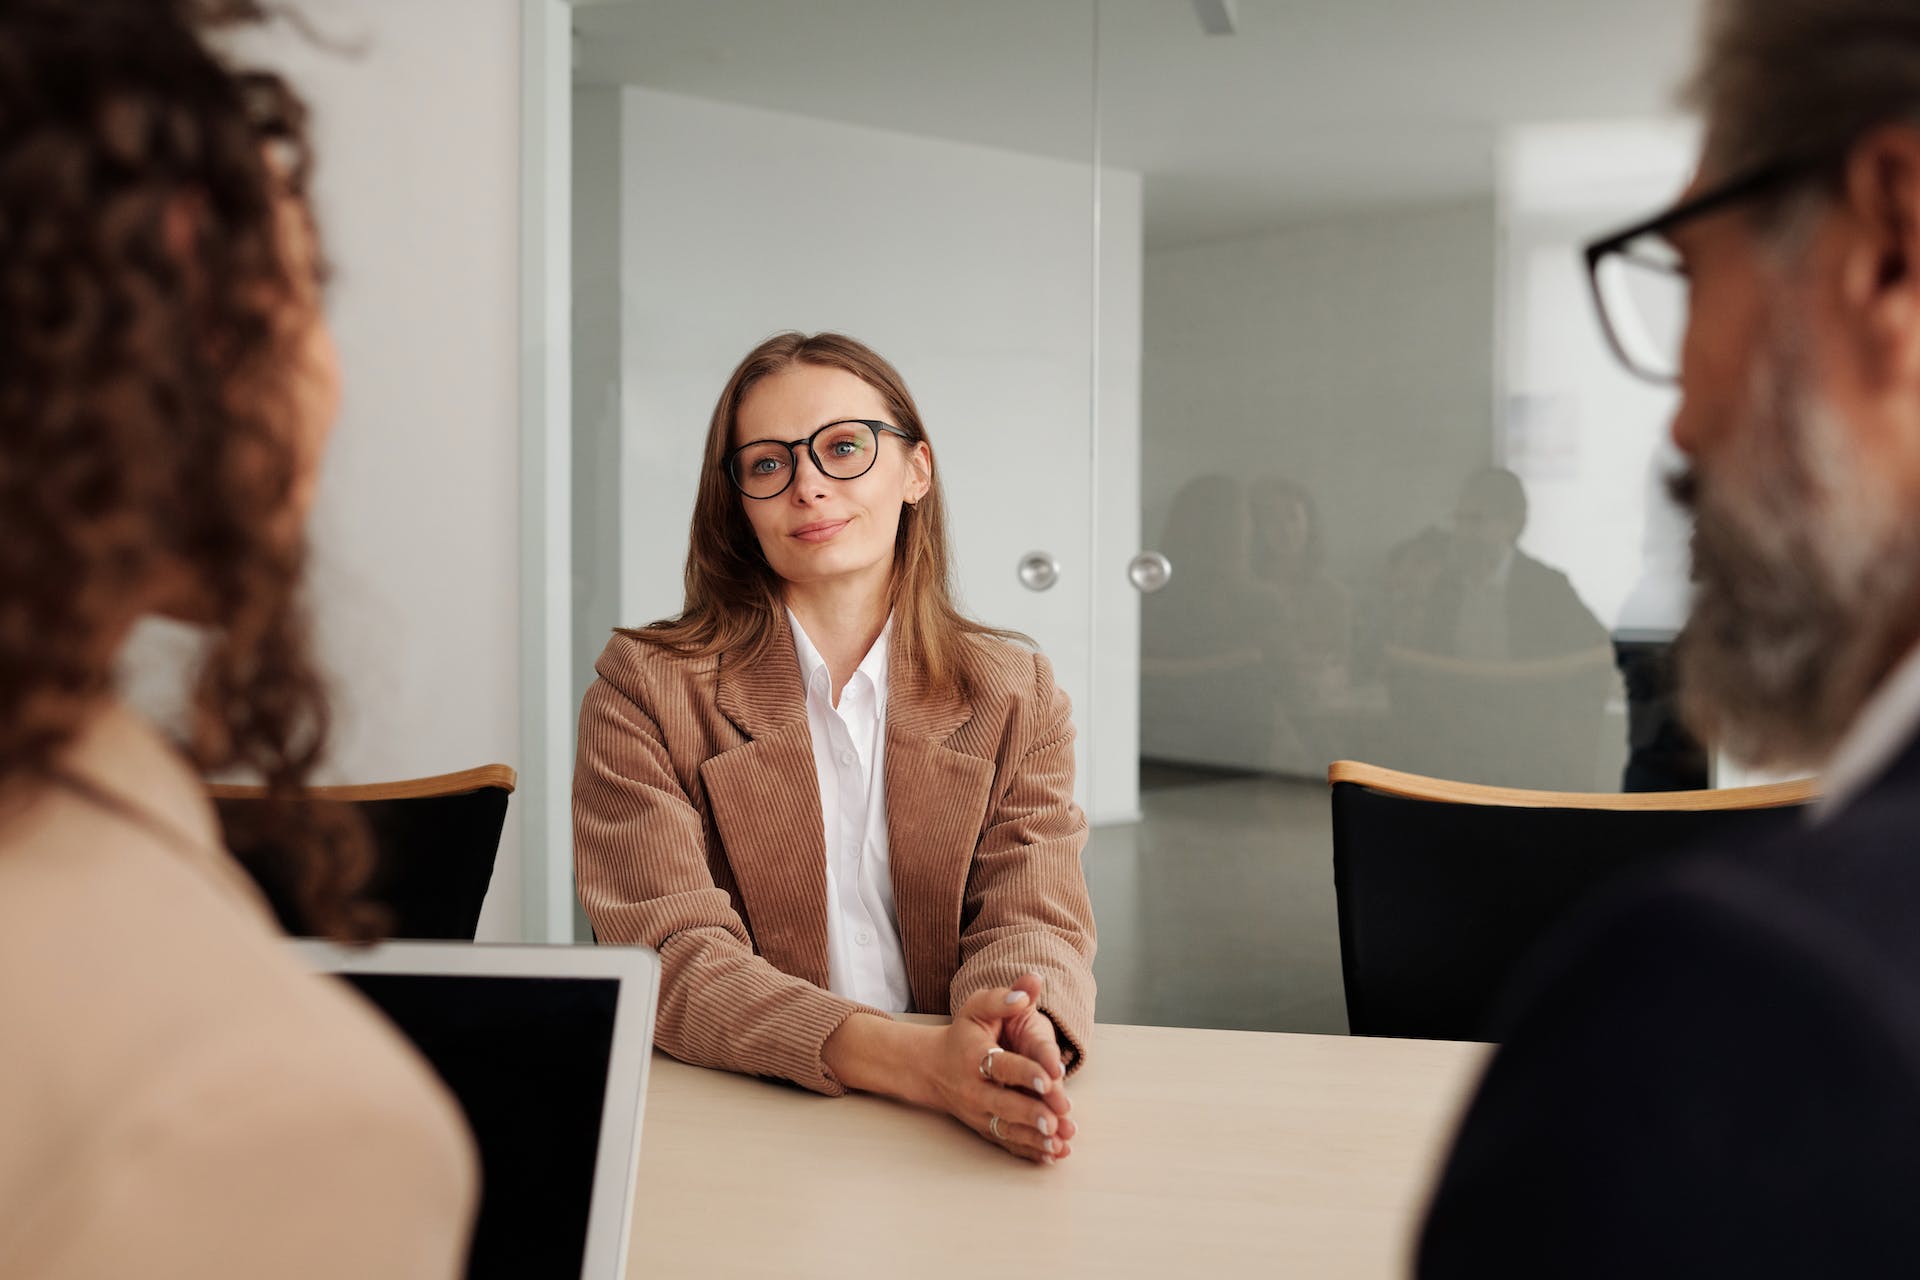 A woman sitting in front of two interviewers | Source: Pexels